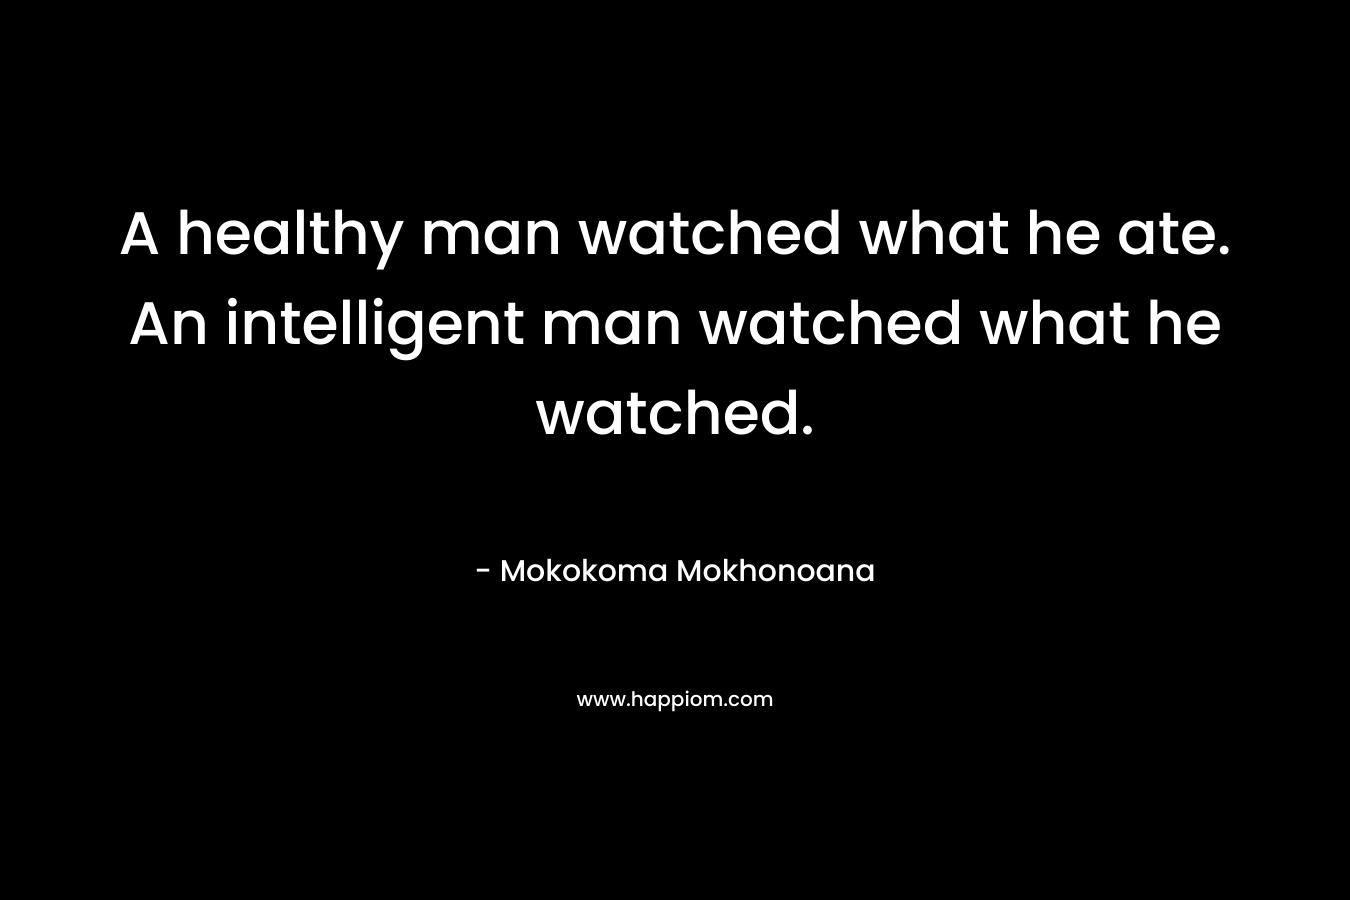 A healthy man watched what he ate. An intelligent man watched what he watched.